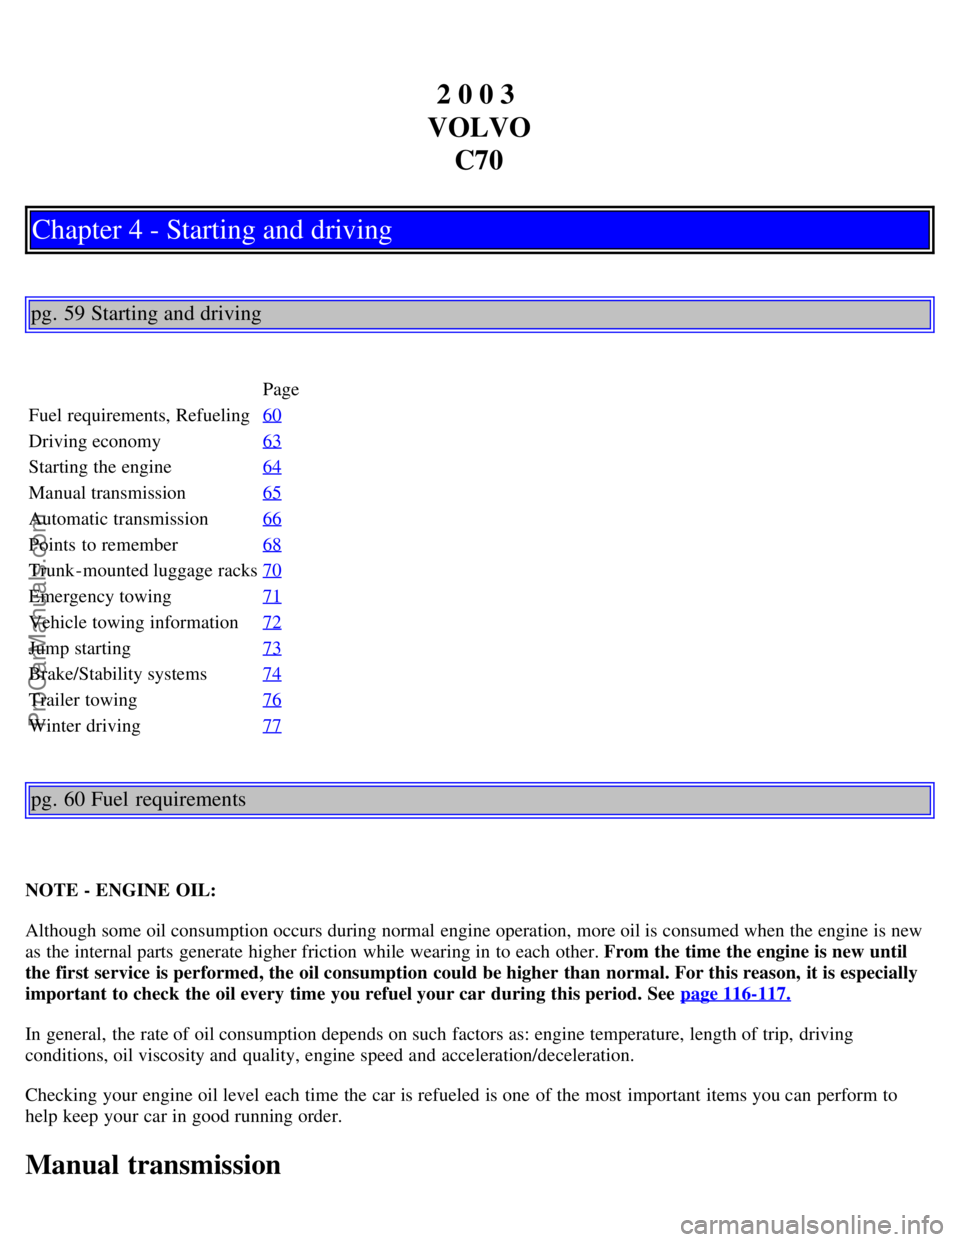 VOLVO C70 2003  Owners Manual 2 0 0 3 
VOLVO C70
Chapter 4 - Starting and driving
pg. 59 Starting and driving
Page
Fuel requirements, Refueling 60
Driving economy63
Starting the engine64
Manual transmission65
Automatic transmissio